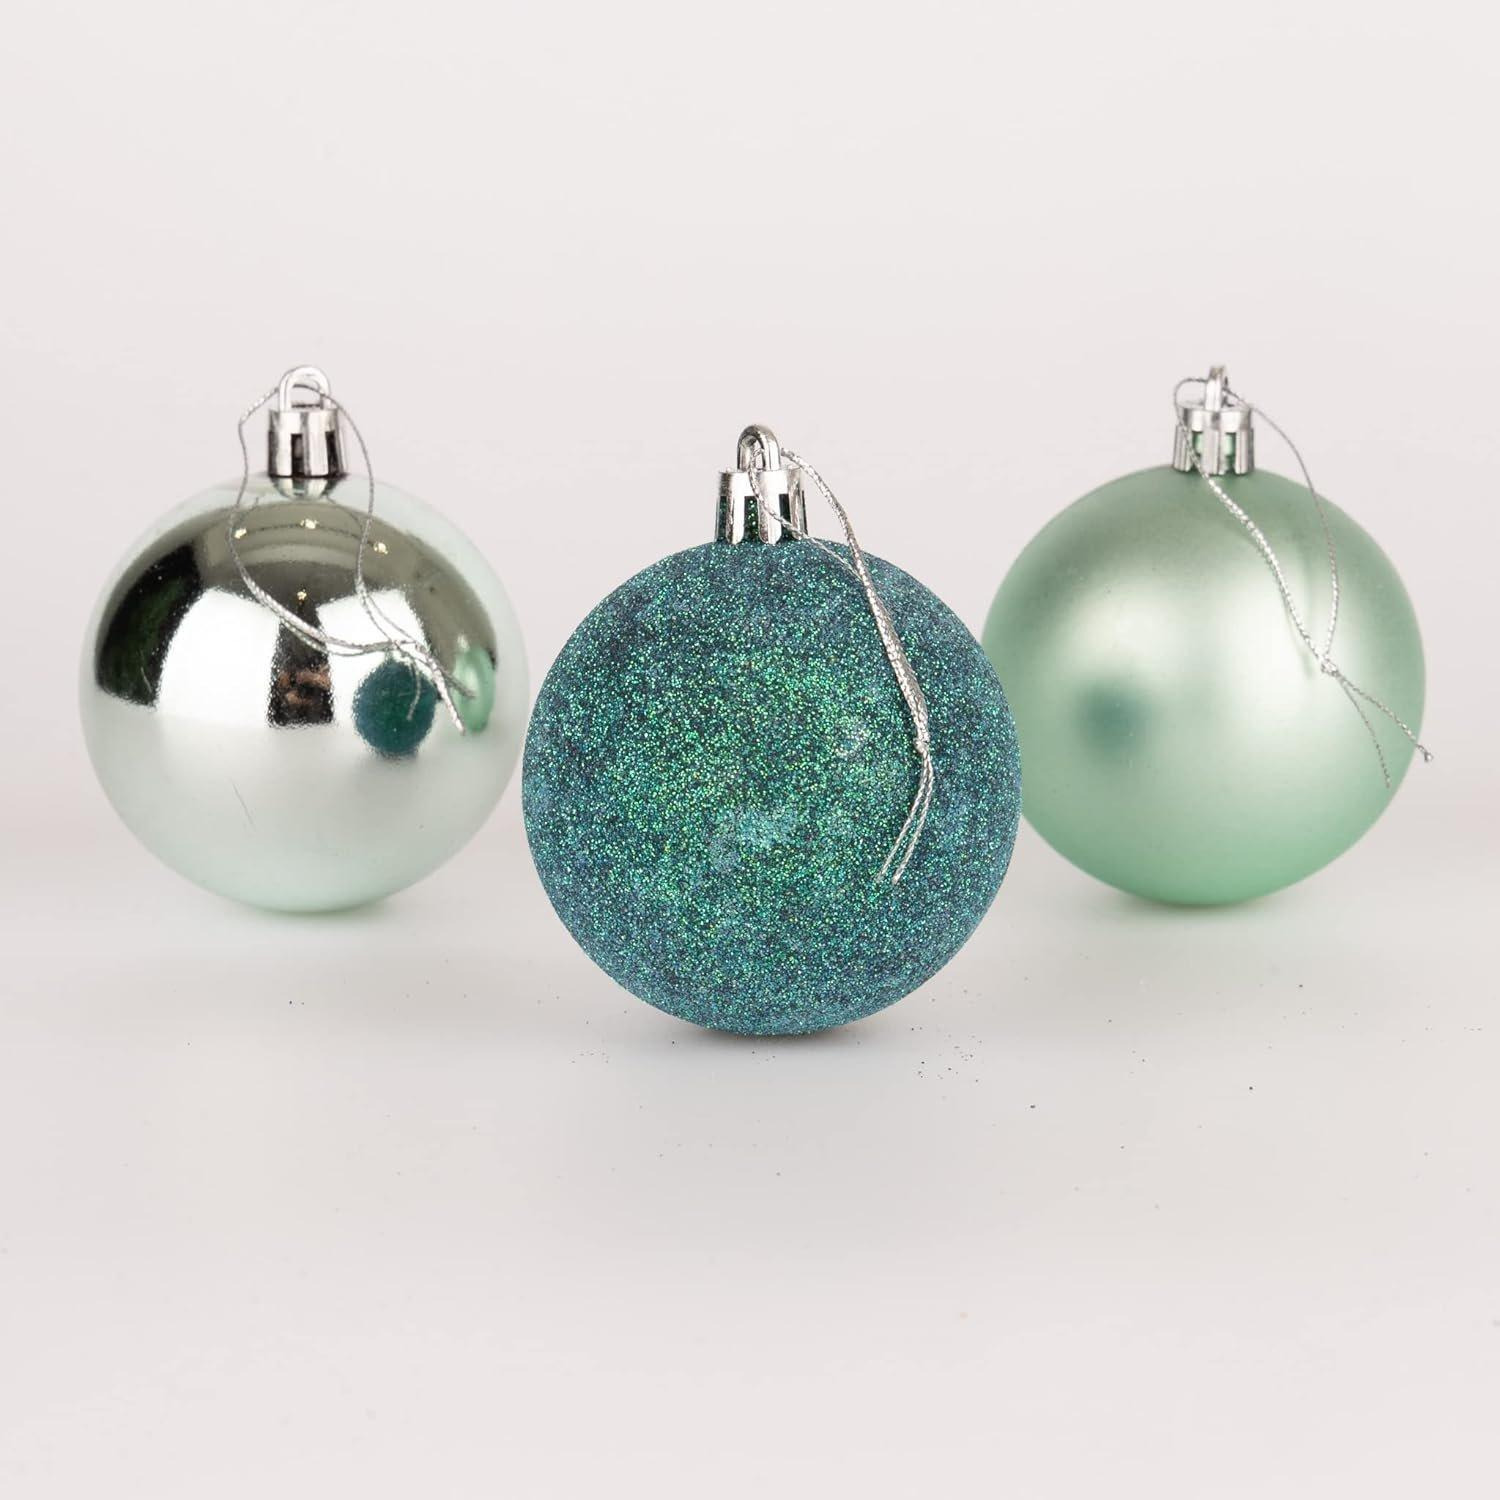 50mm/24Pcs Christmas Baubles Shatterproof Turquoise,Tree Decorations - image 1